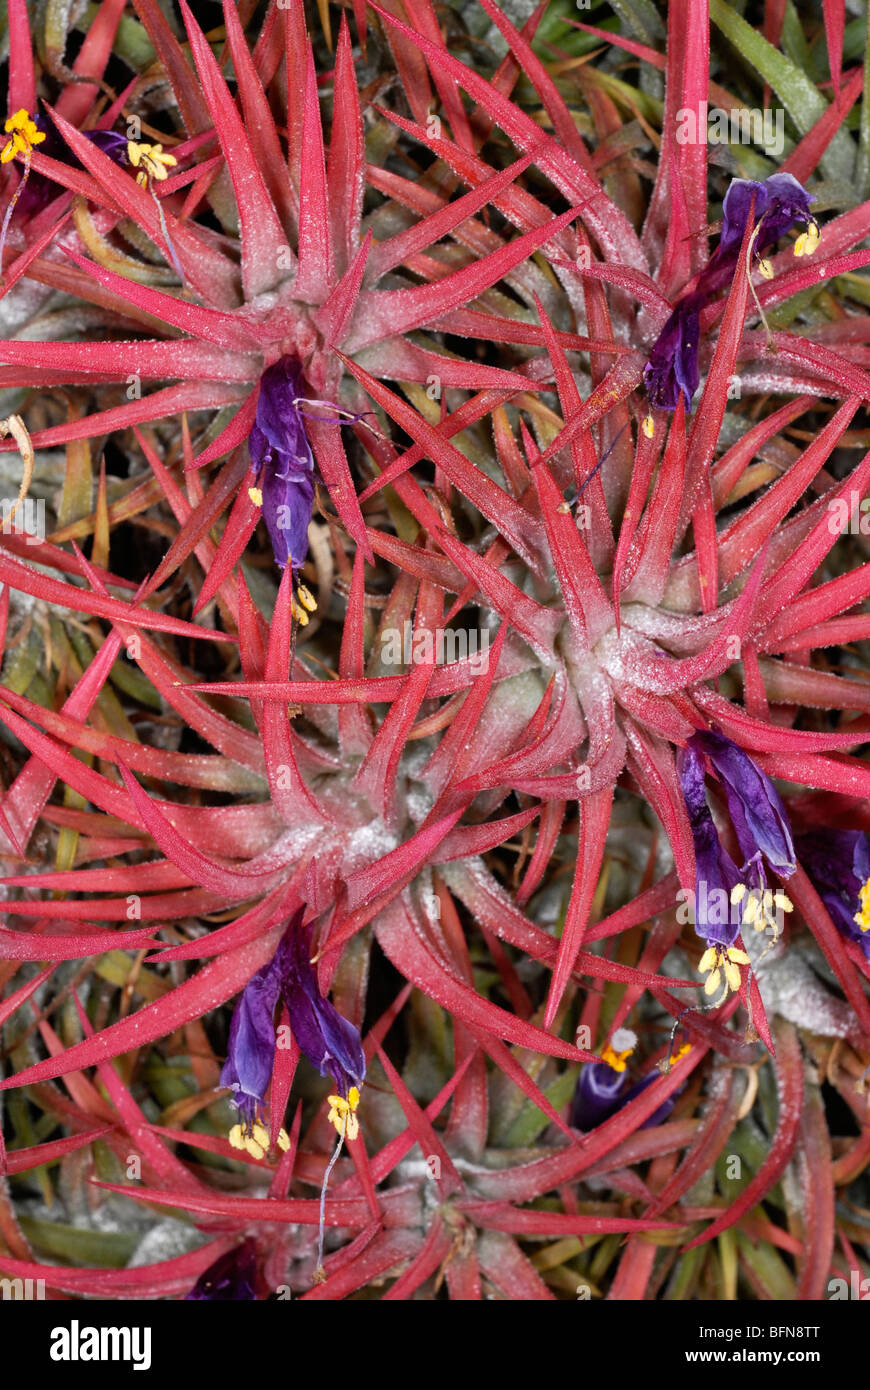 Tillandsia ionantha, a flowering plant in the family Bromeliaceae (the bromeliads) Stock Photo